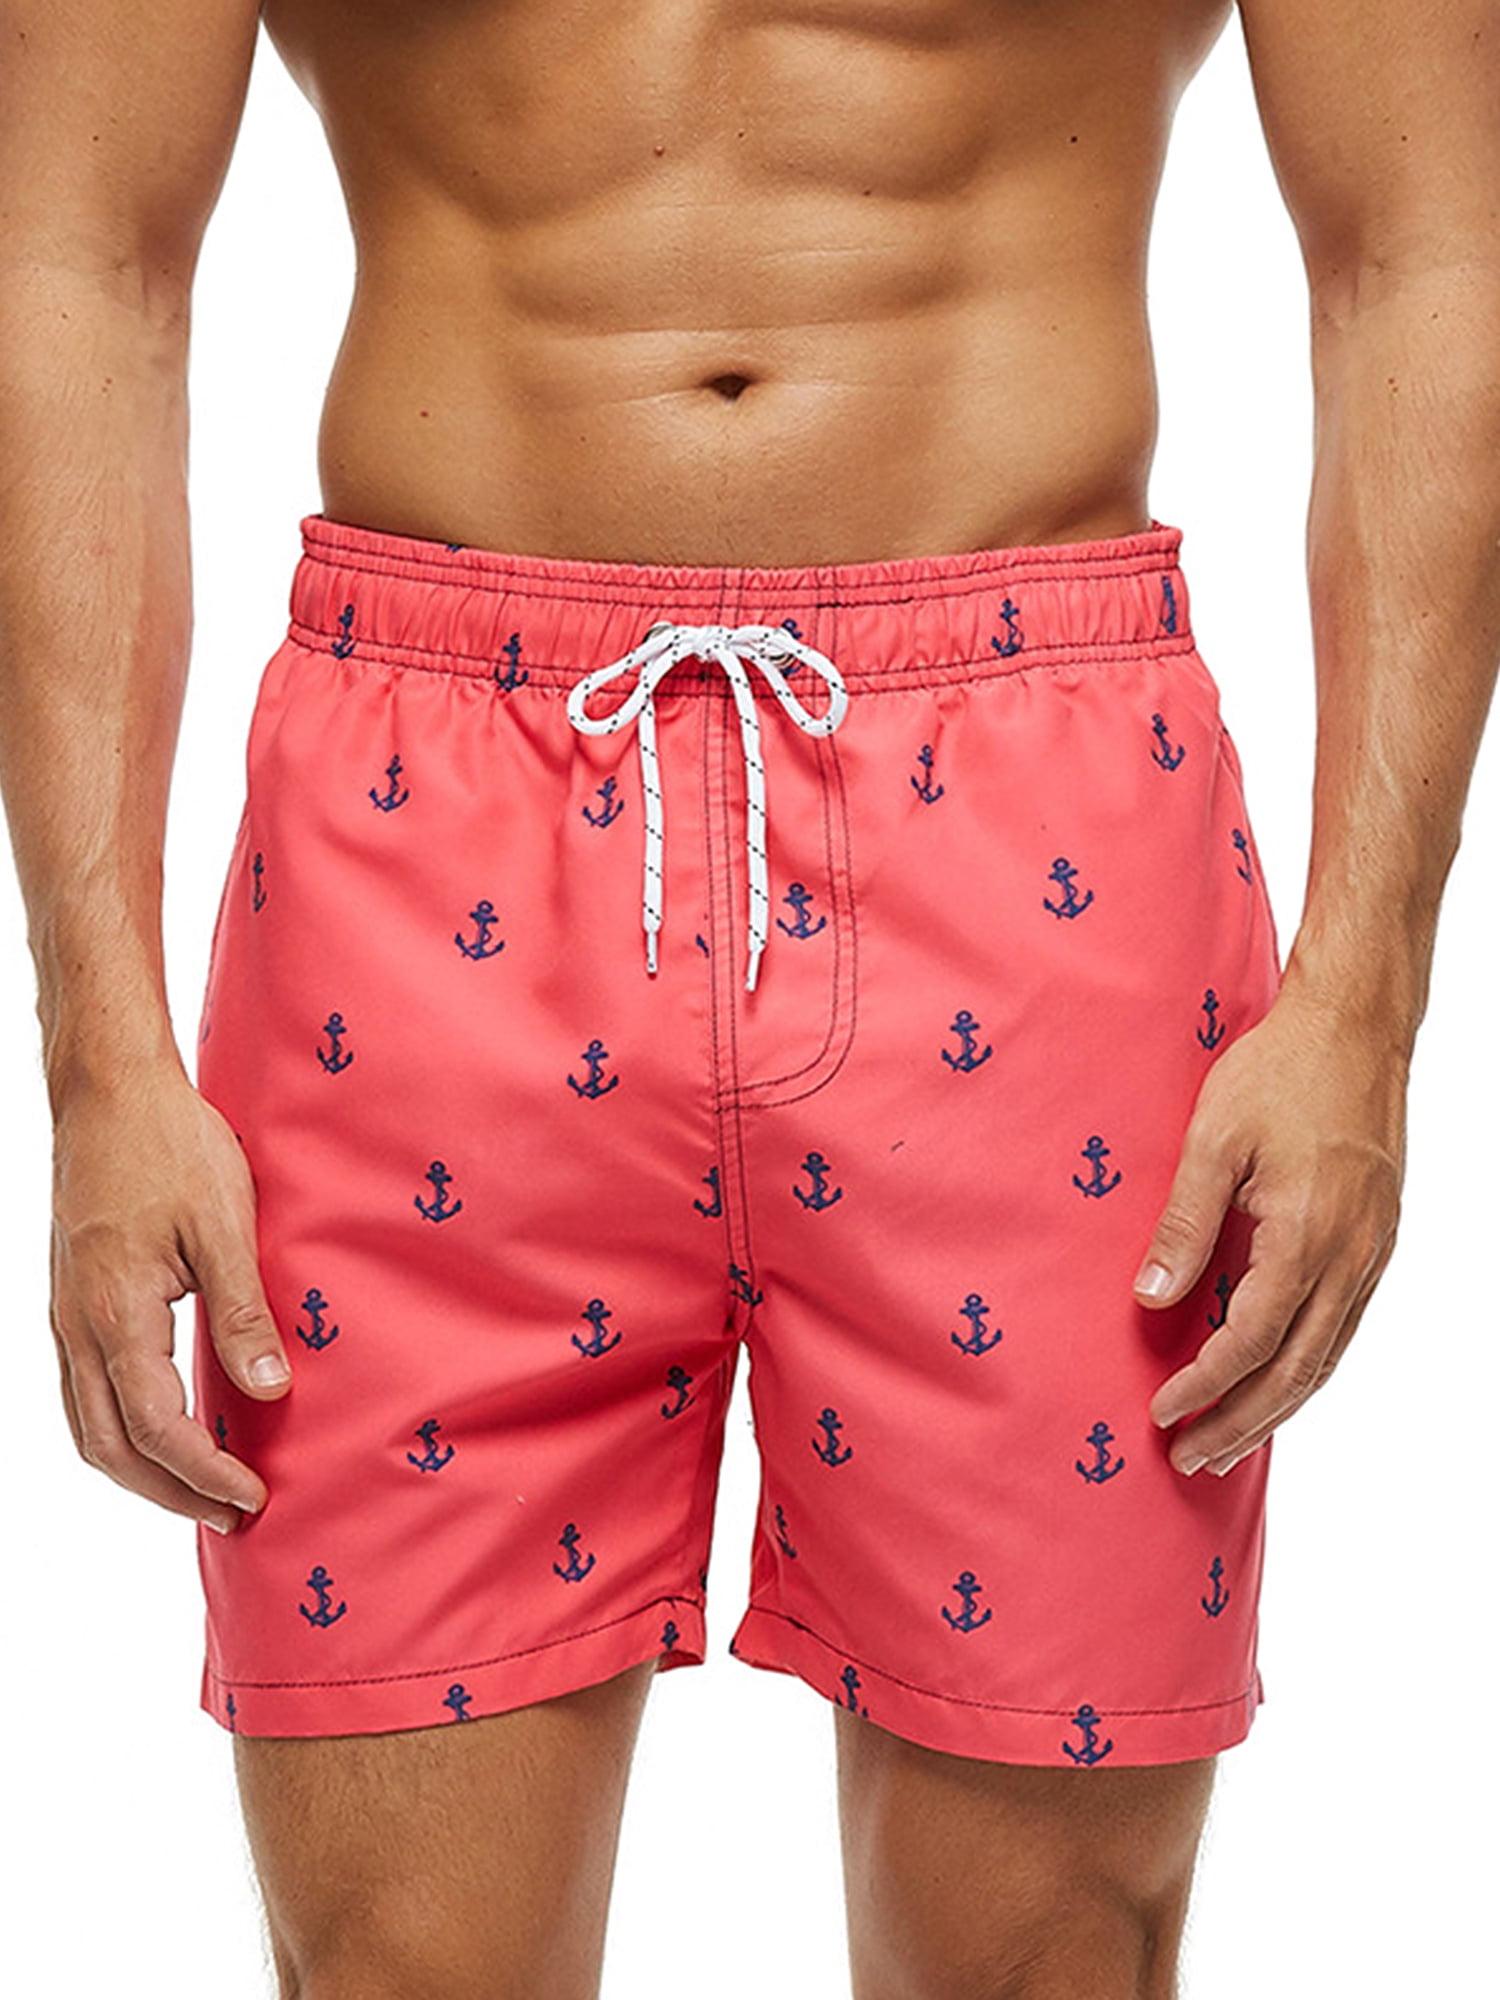 Mens Shorts Pineapples Pink Basketball Short Briefs Trousers for Boys 